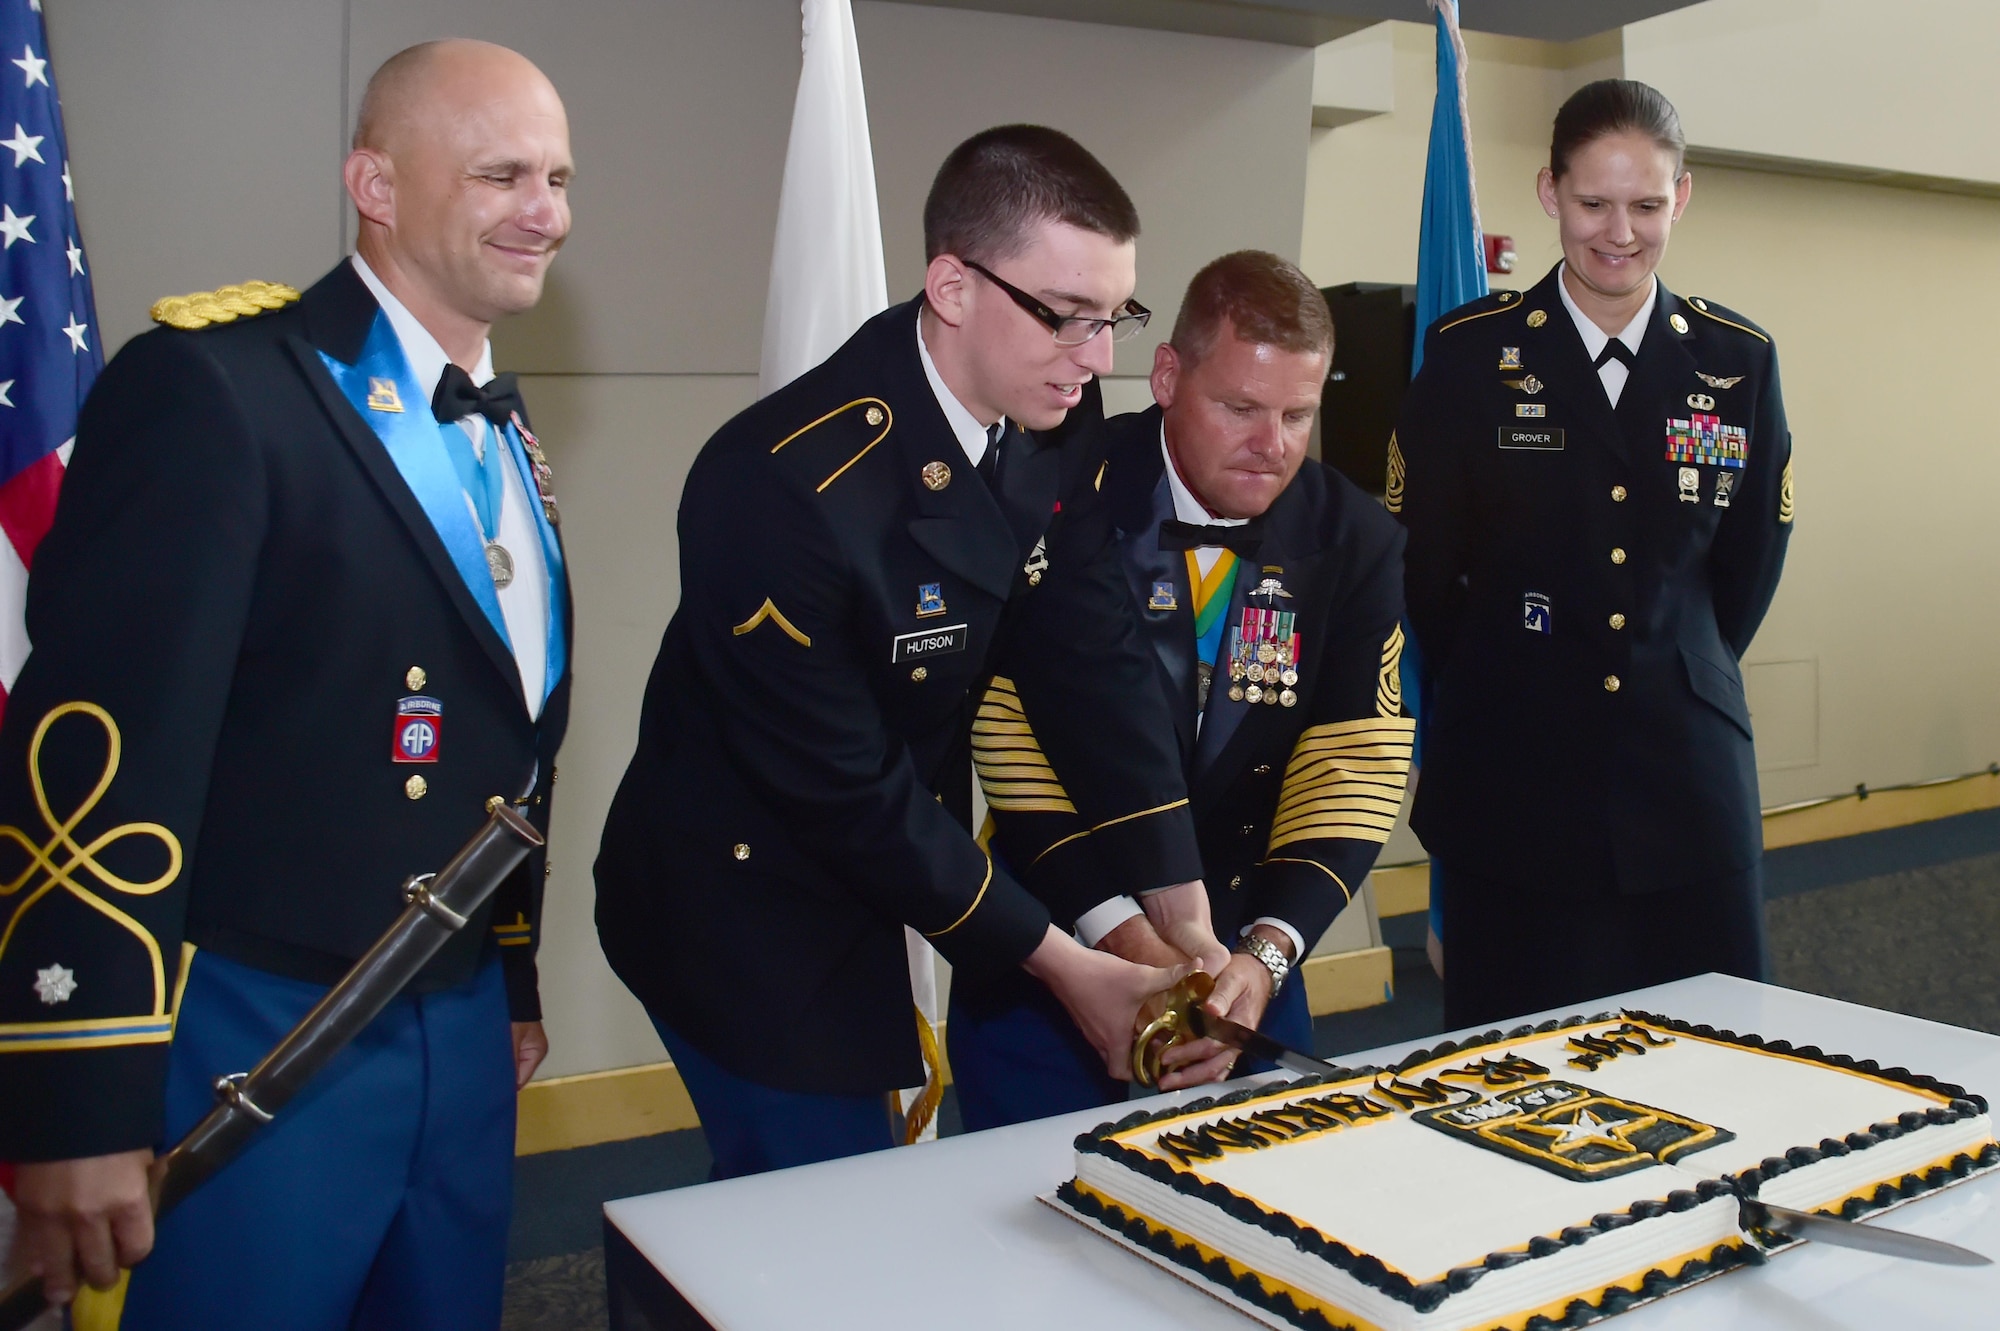 U.S. Army Sgt. Maj. Ramond Ramsey, 743rd Military Intelligence Battalion, and Pvt. Jacob Hudson, 743rd MIB analyst, cut the cake in celebration of the Army’s 241st birthday June 10, 2016, at Sports Authority Field at Mile High in Denver. The 743rd MIB held their annual ball which recognizes the U.S. Army’s birthday each year. (U.S. Air Force photo by Airman 1st Class Luke W. Nowakowski/Released)